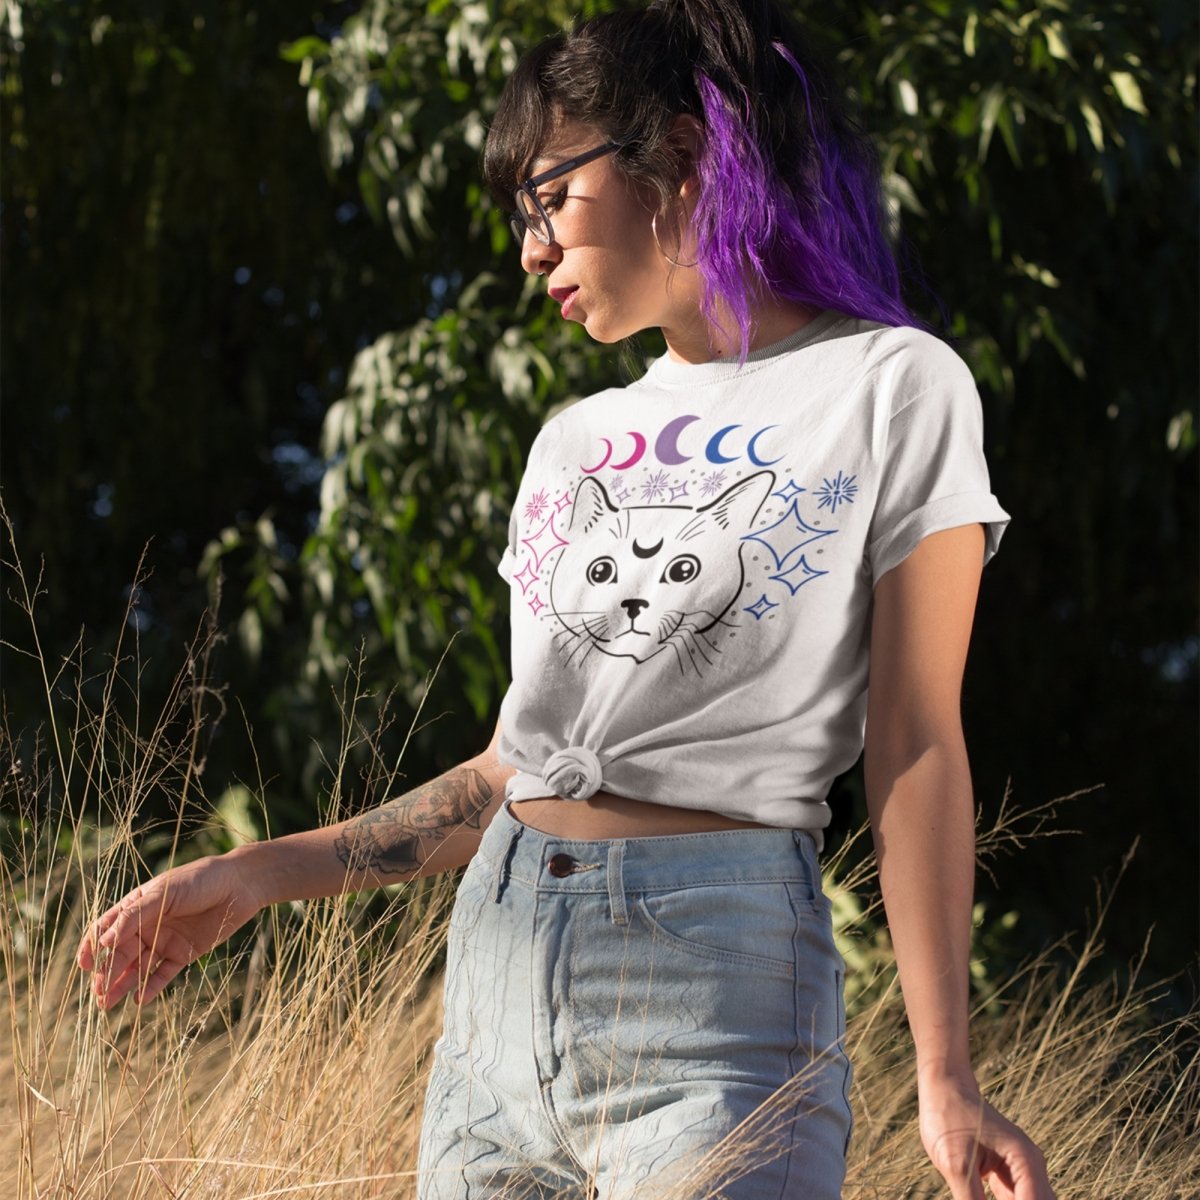 Bisexual Celestial Cat Shirt - On Trend Shirts